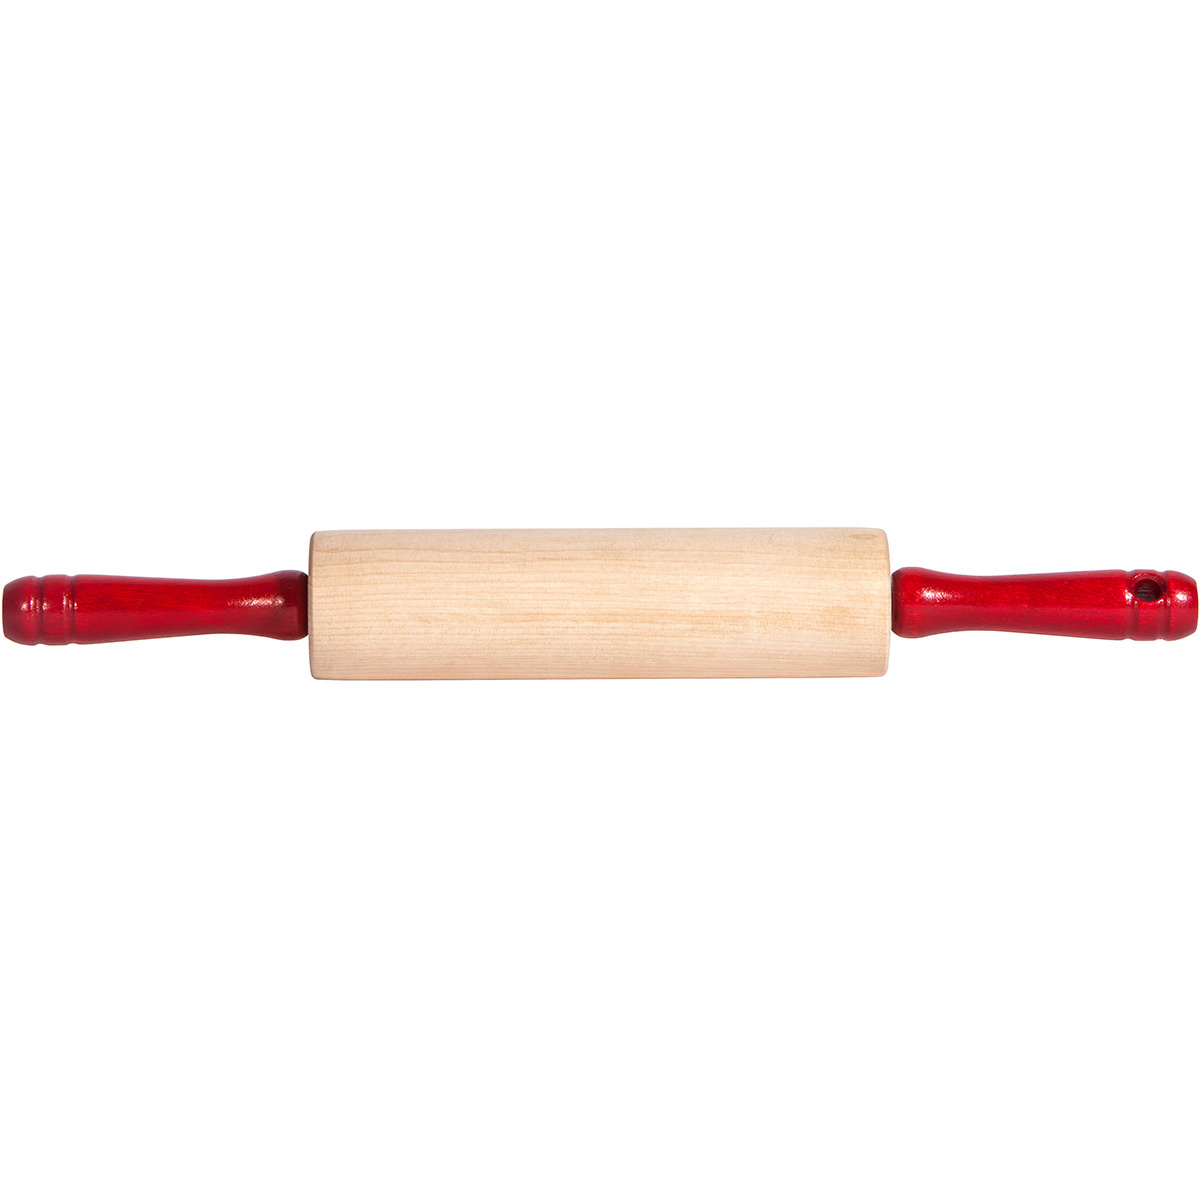 The Red Rolling Pin